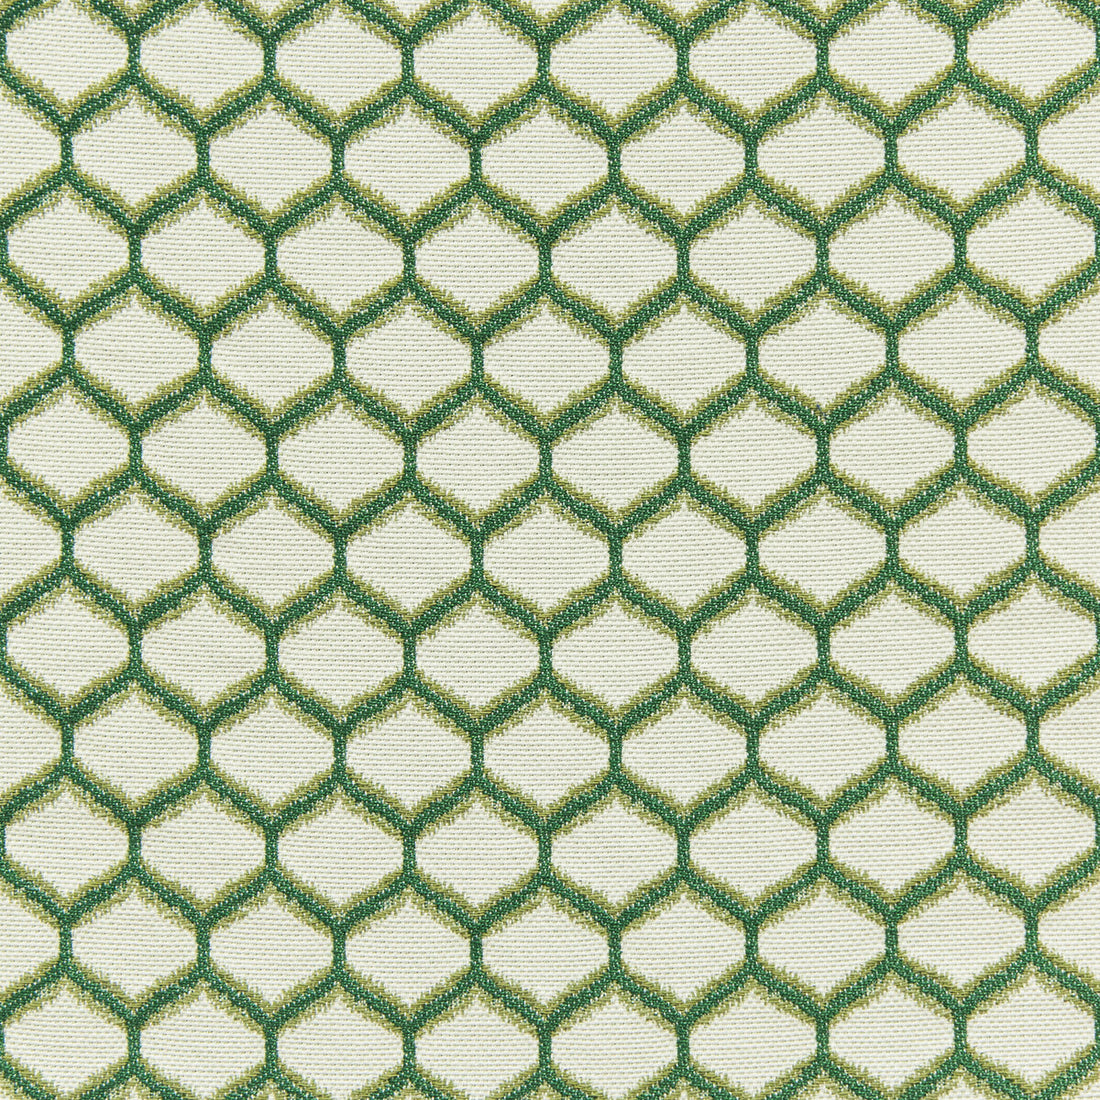 Elmley Weave fabric in leaf color - pattern 2020105.3.0 - by Lee Jofa in the Linford Weaves collection